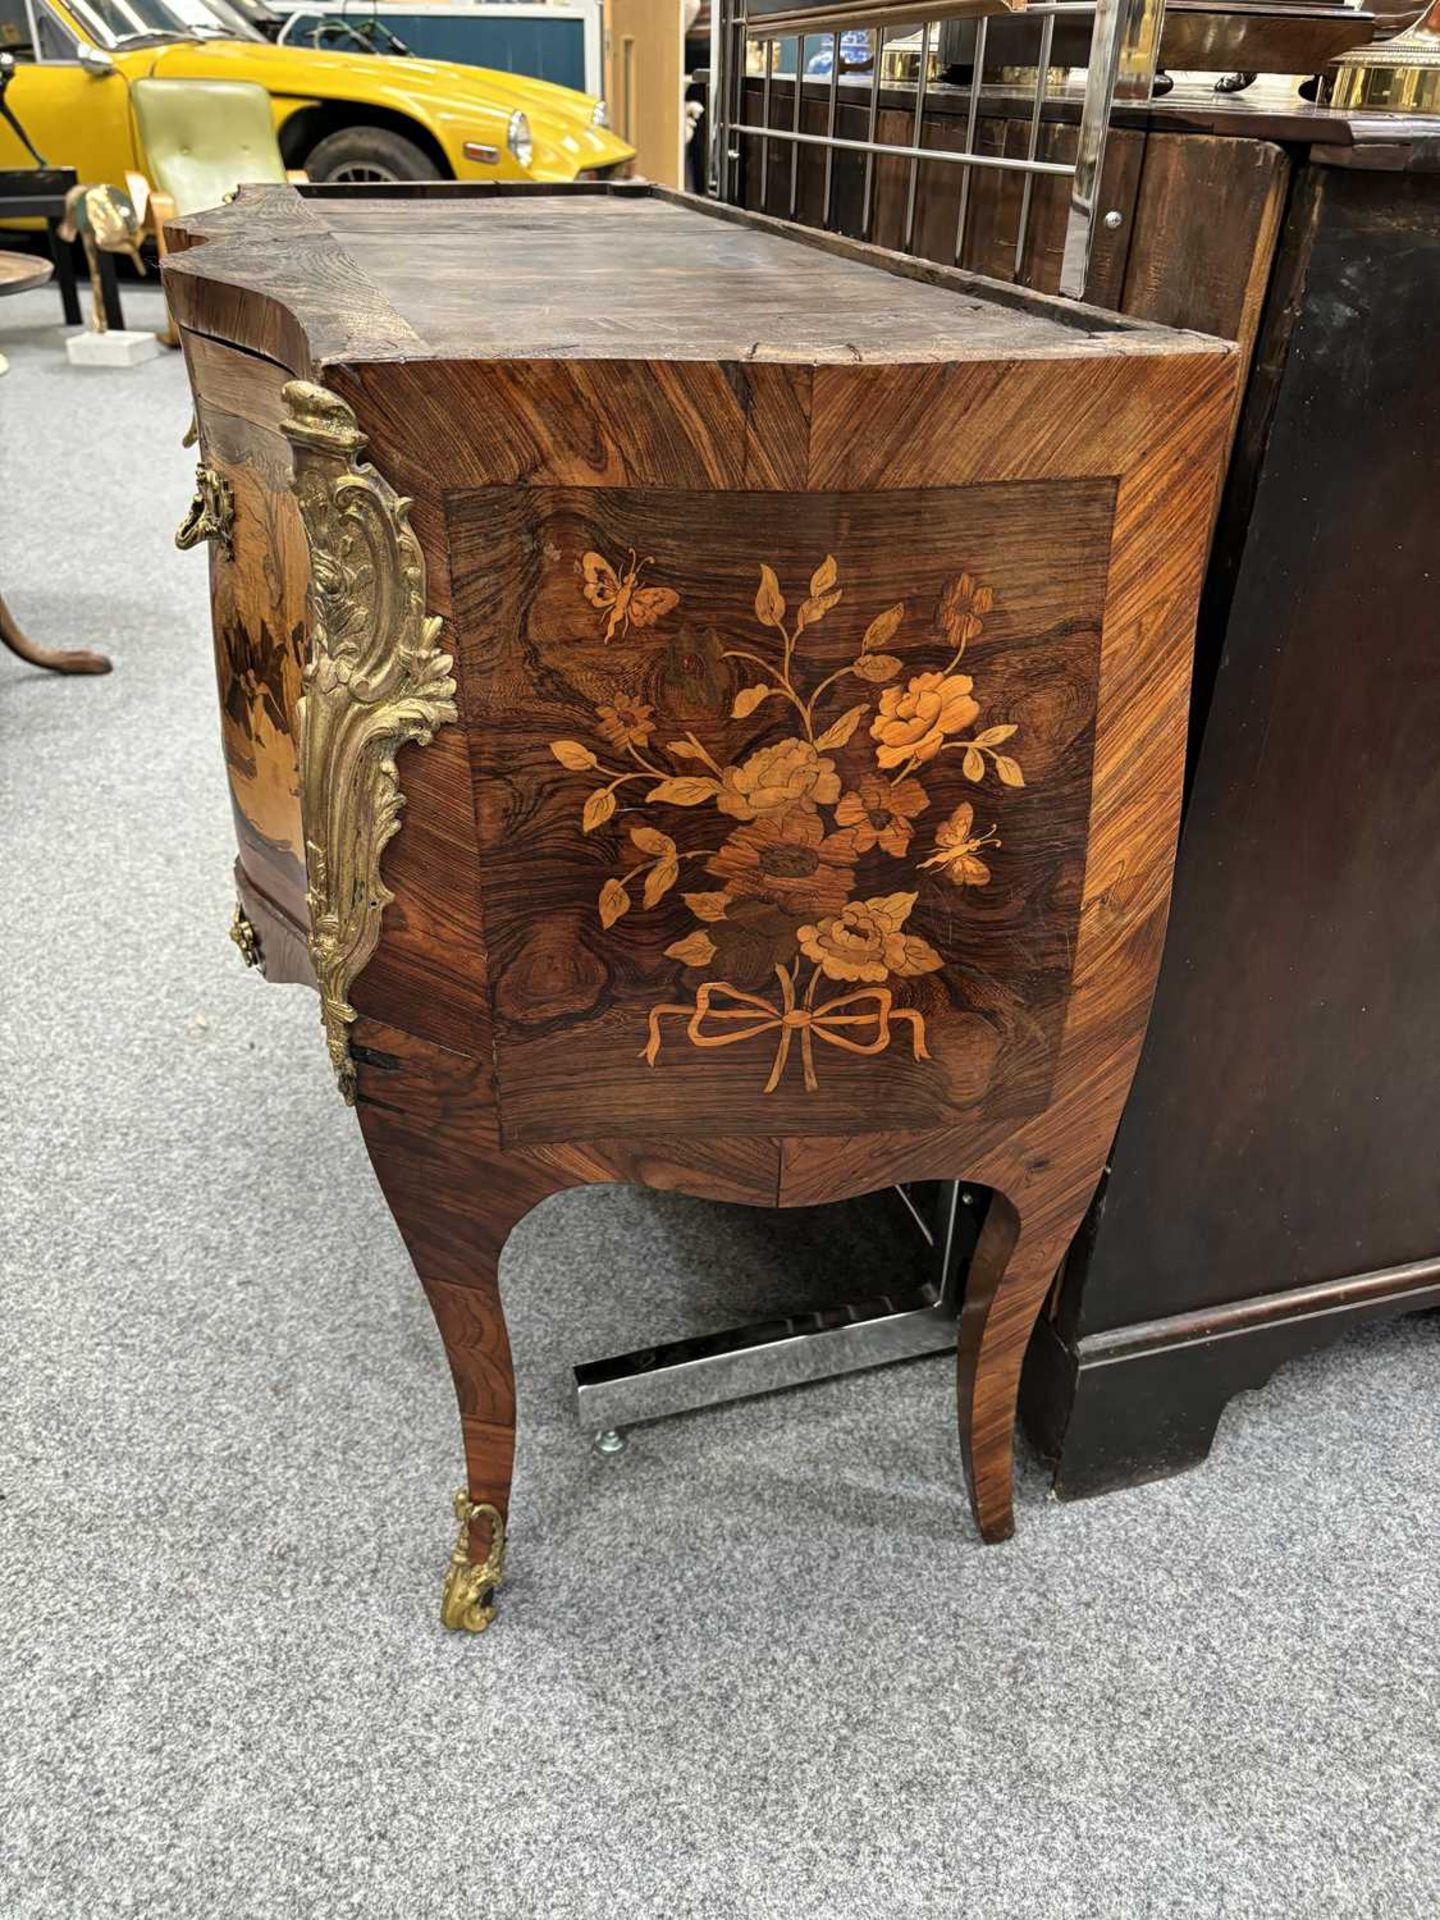 A SMALL 19TH CENTURY FRENCH INLAID KINGWOOD MARBLE-TOPPED COMMODE, STAMPED L. DROMARD, PARIS - Image 11 of 15